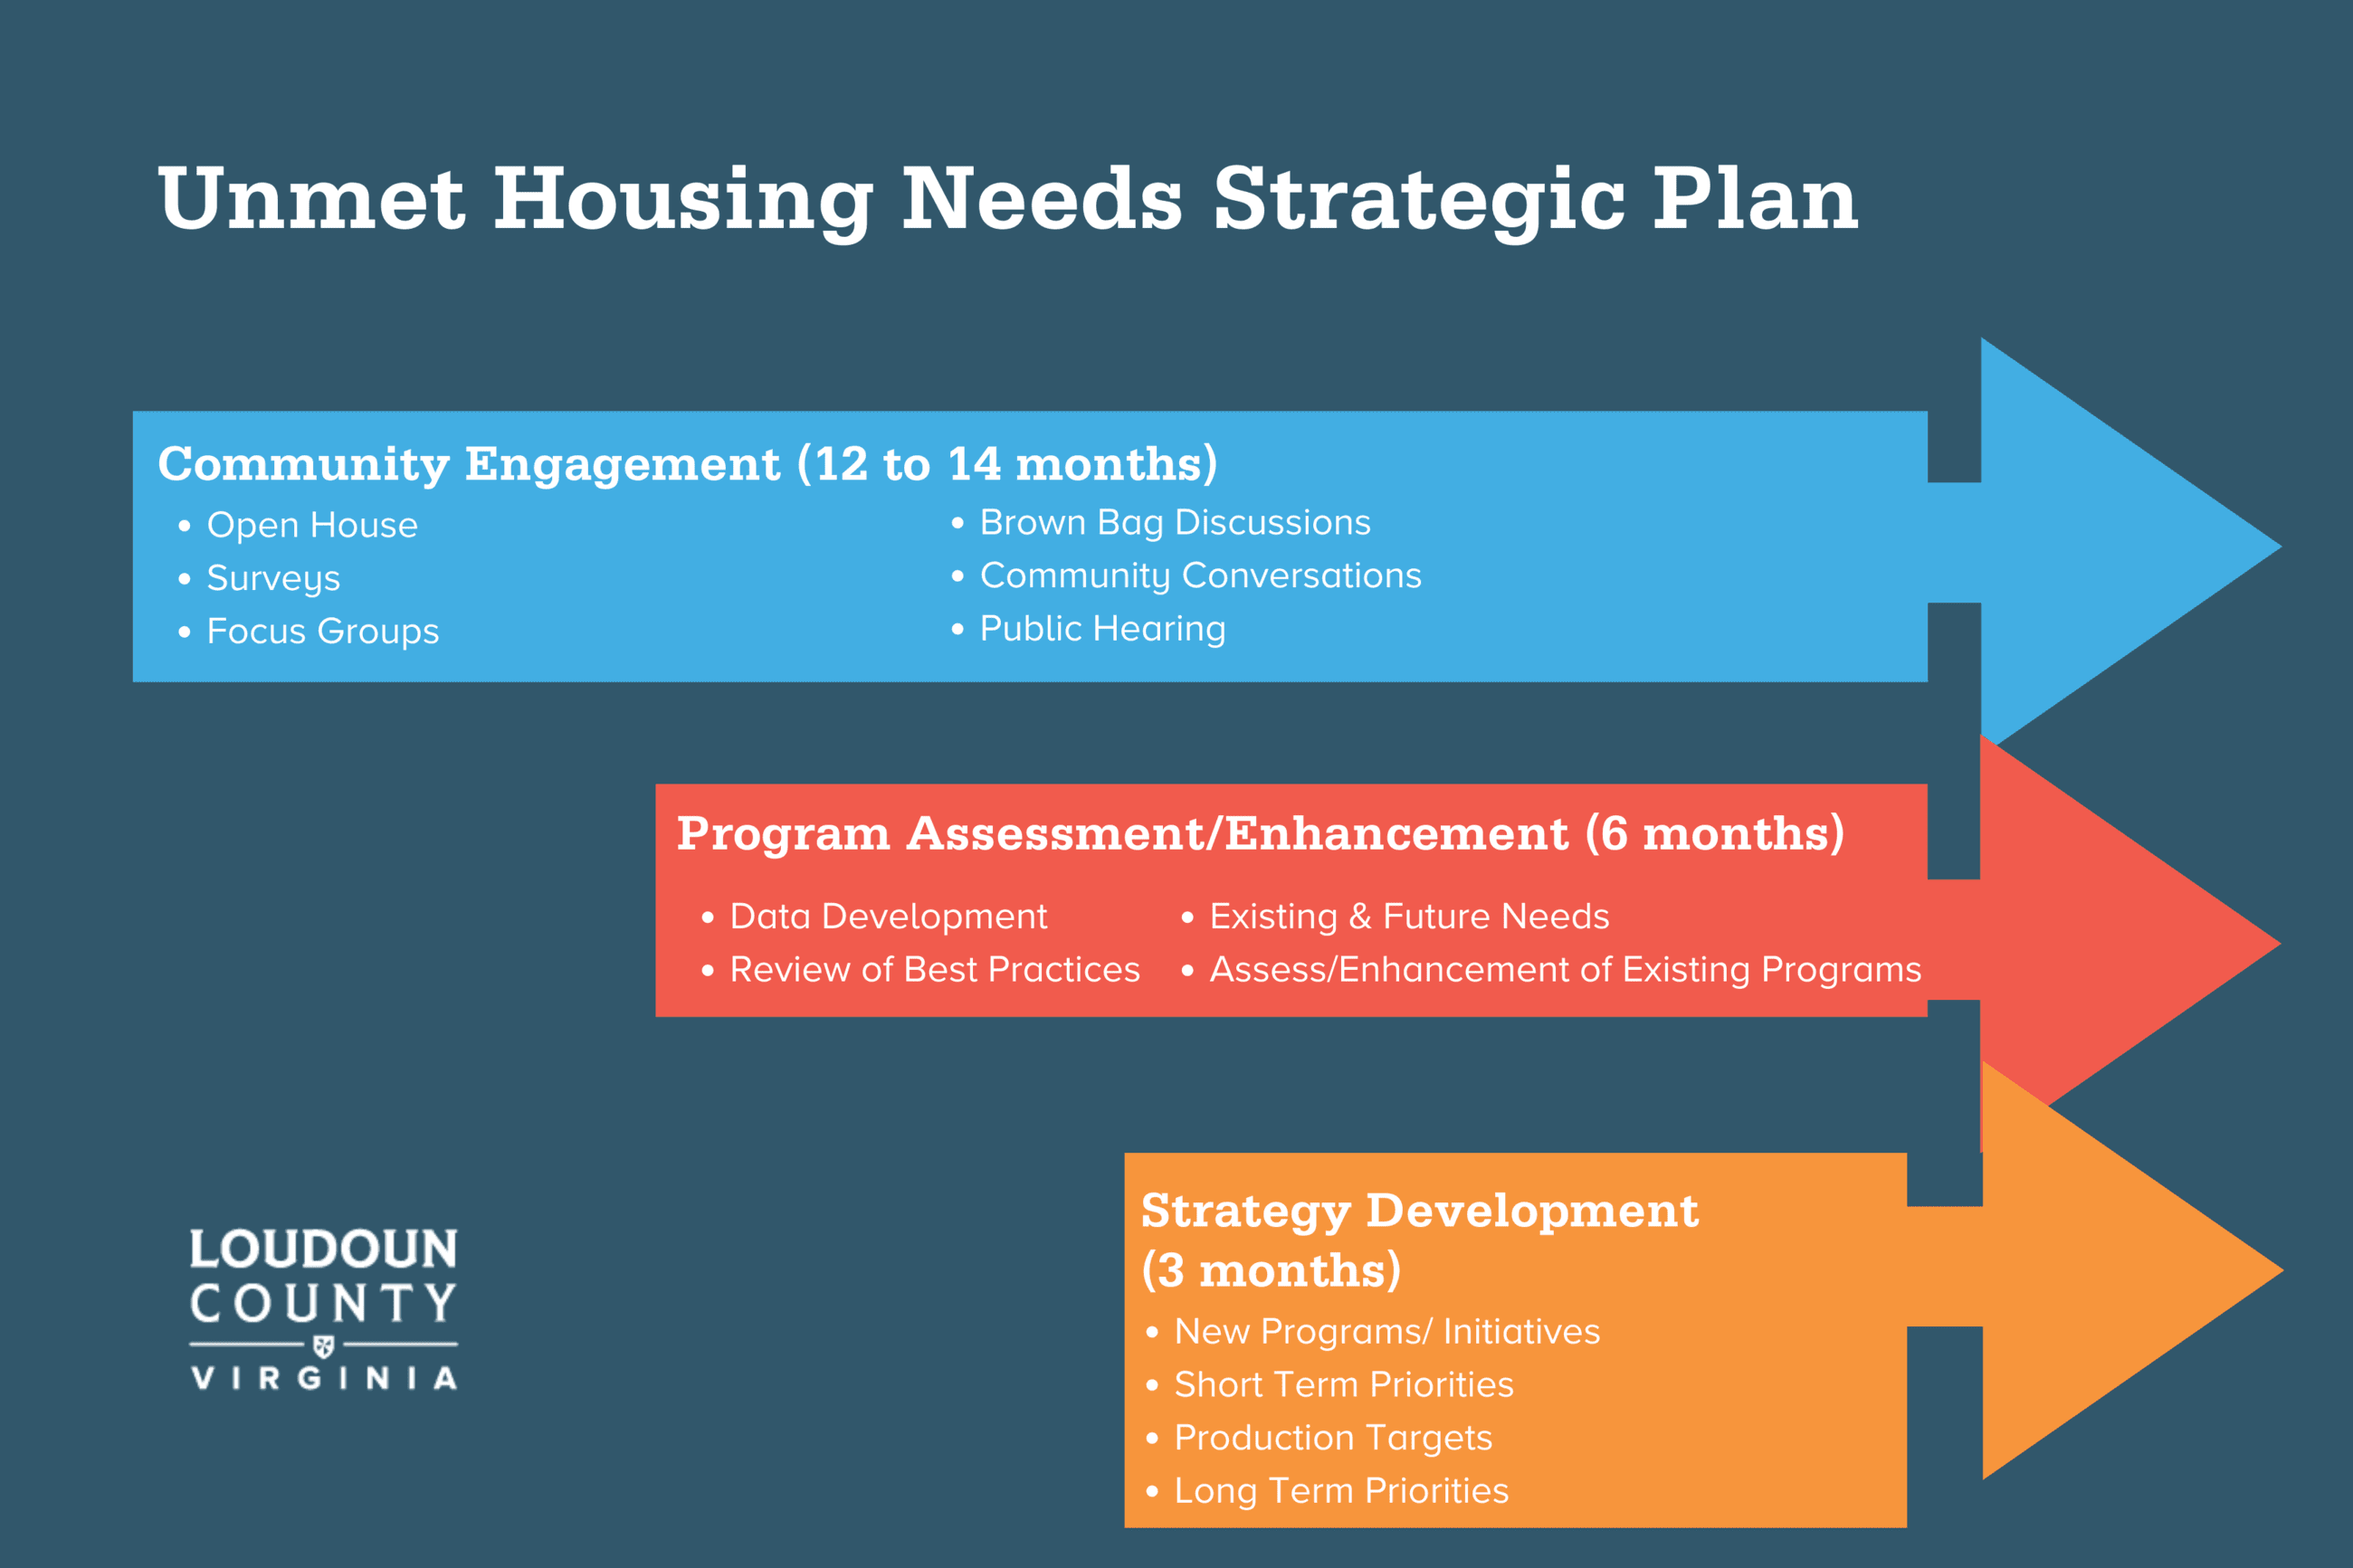 An image of the process for developing the Unmet Housing Needs Strategic Plan.